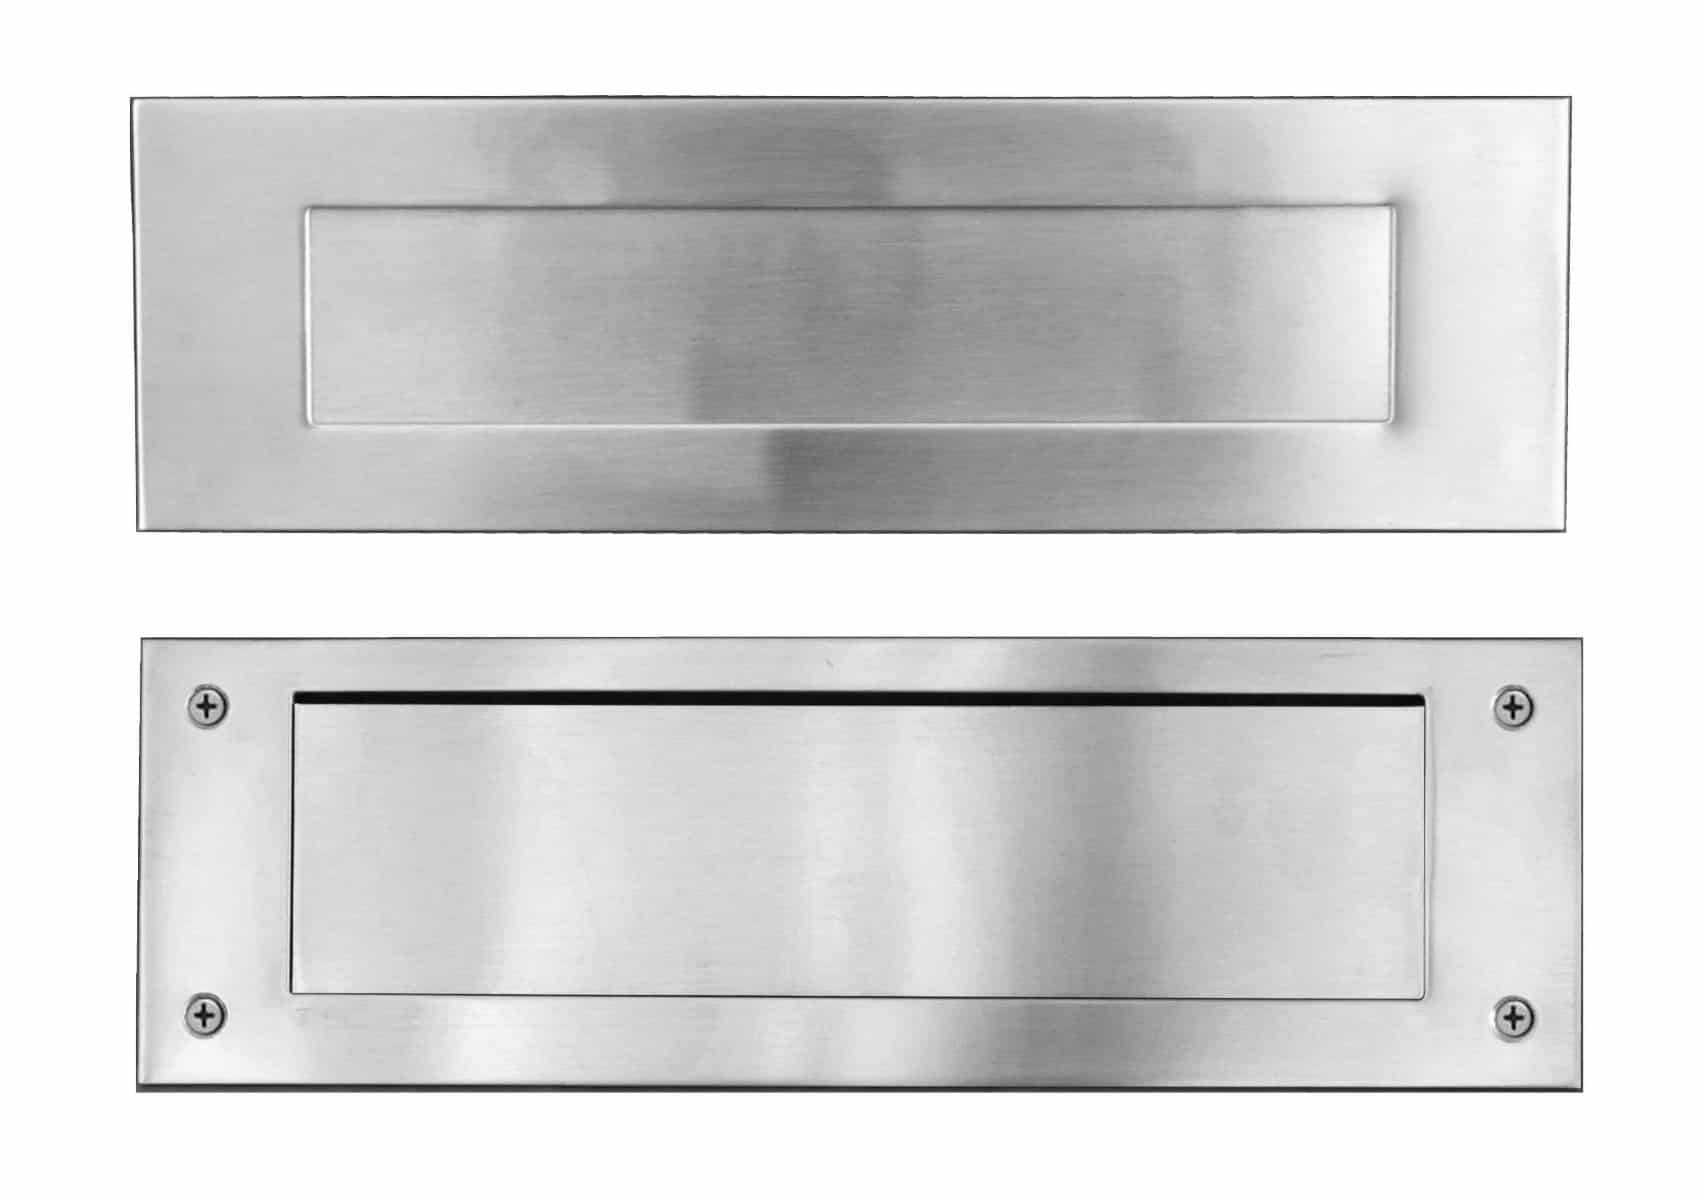 Stainless Steel Mail Slot (includes front & rear pieces) Product Image